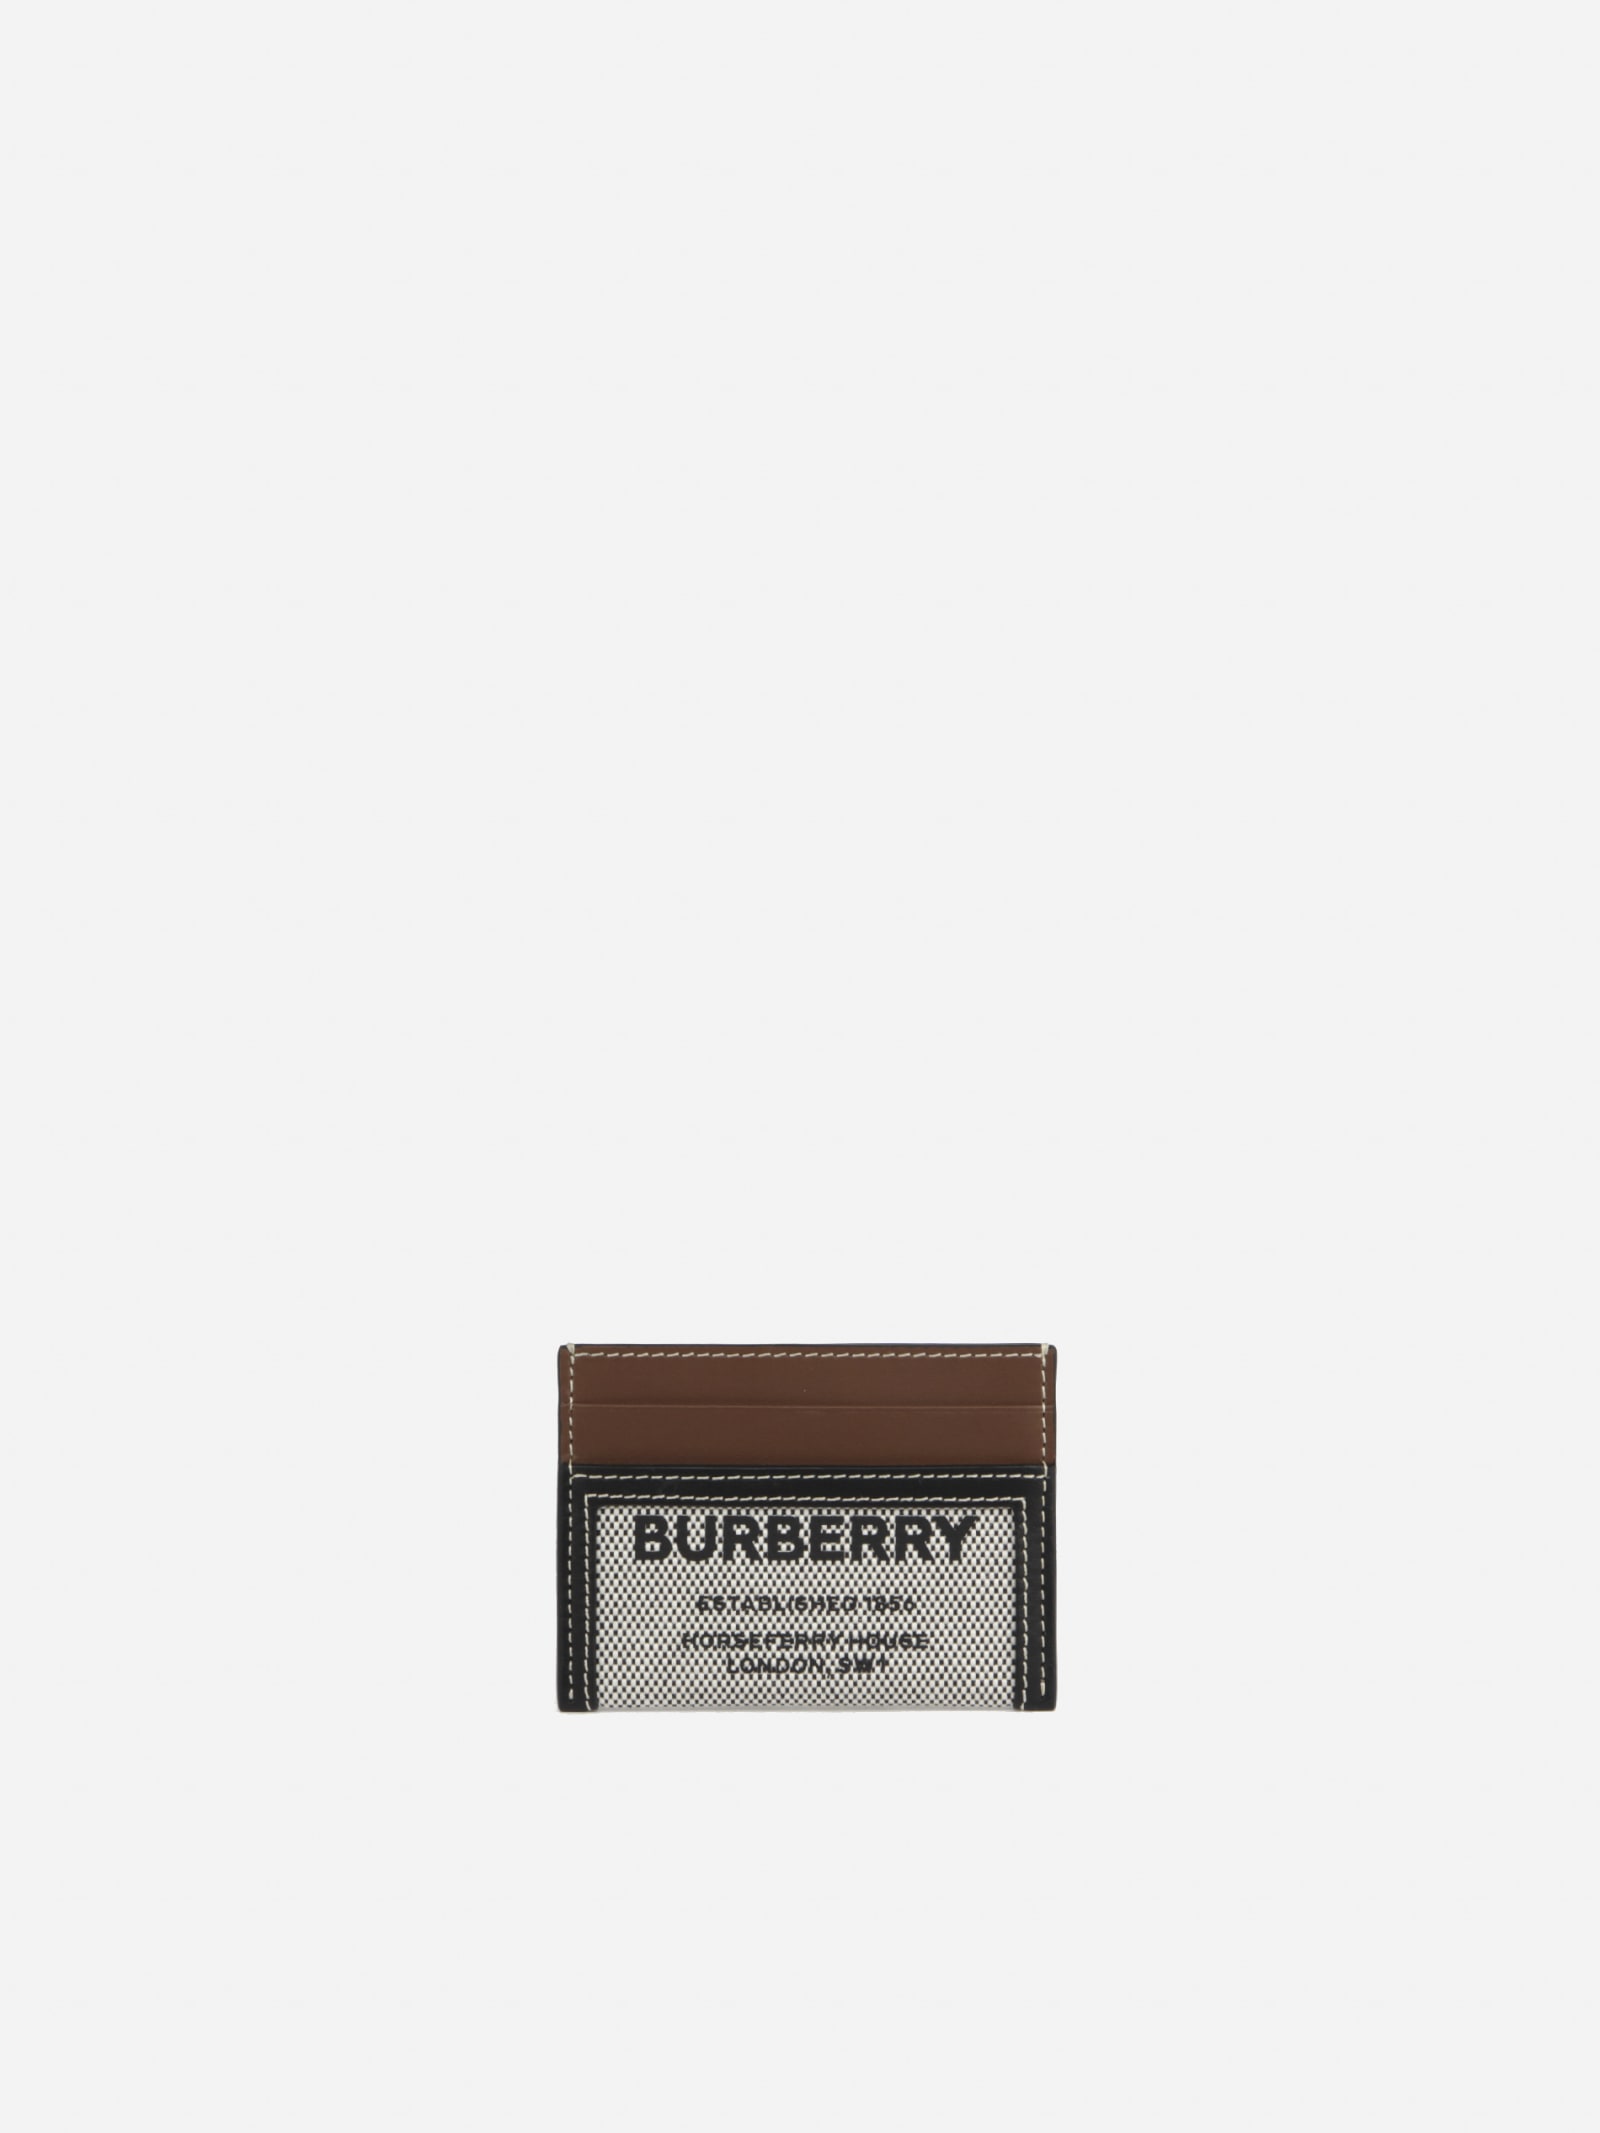 Burberry Card Holder With Horseferry Print